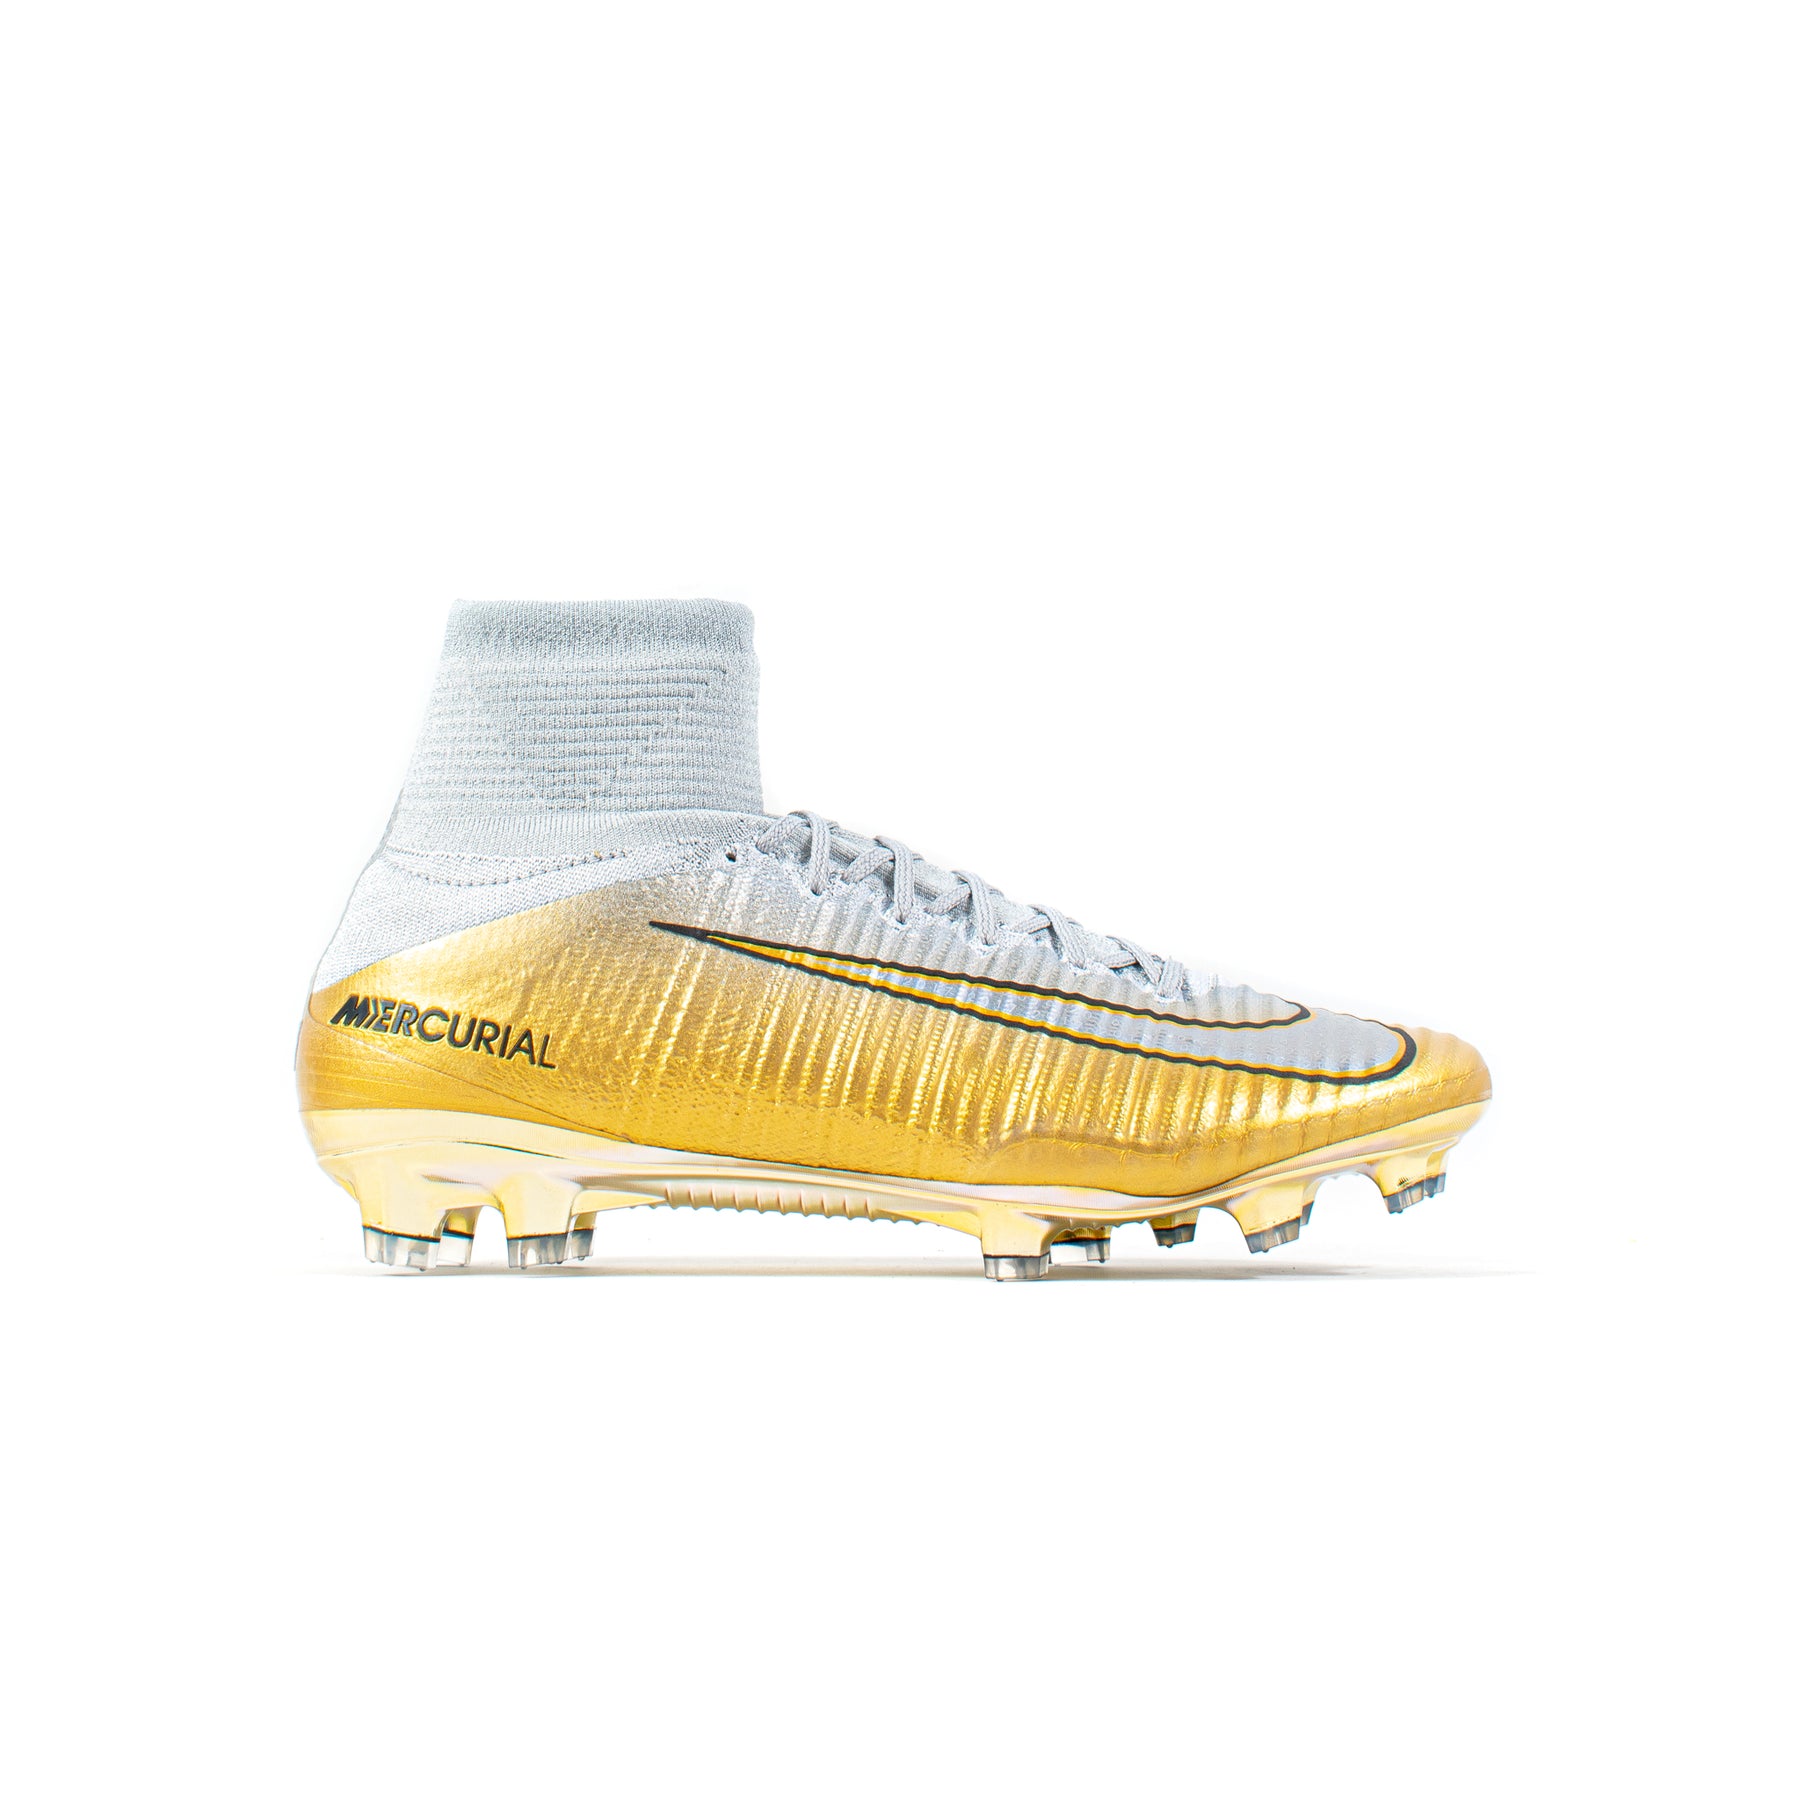 Nike Superfly V Elite Quinto Triunfo CR7 Gold – Soccer Cleats